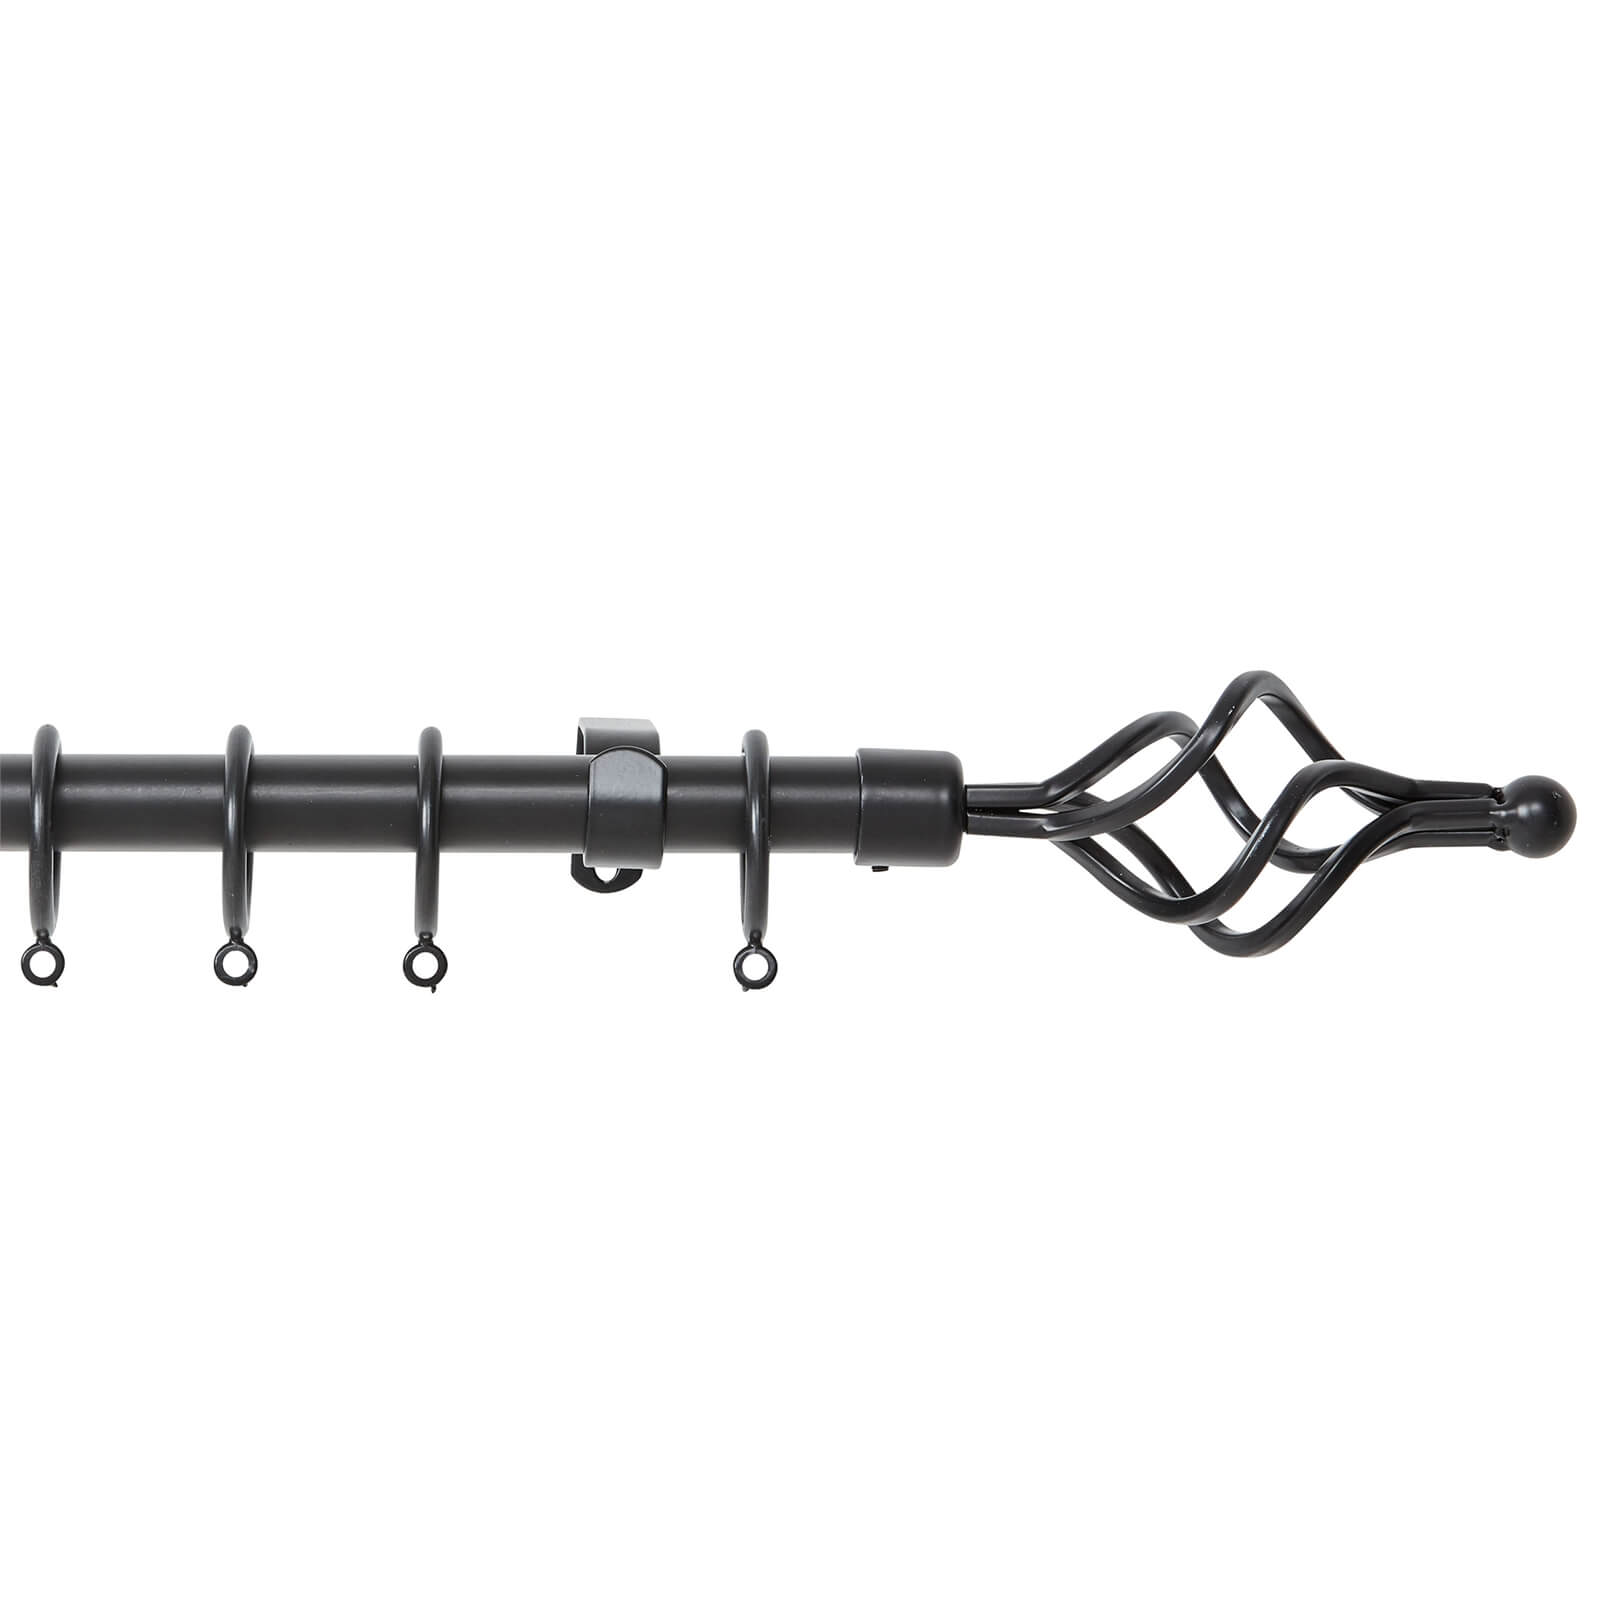 Extendable Cage Finial Curtain Pole - Black - 1.2-2.1m (16/19mm)